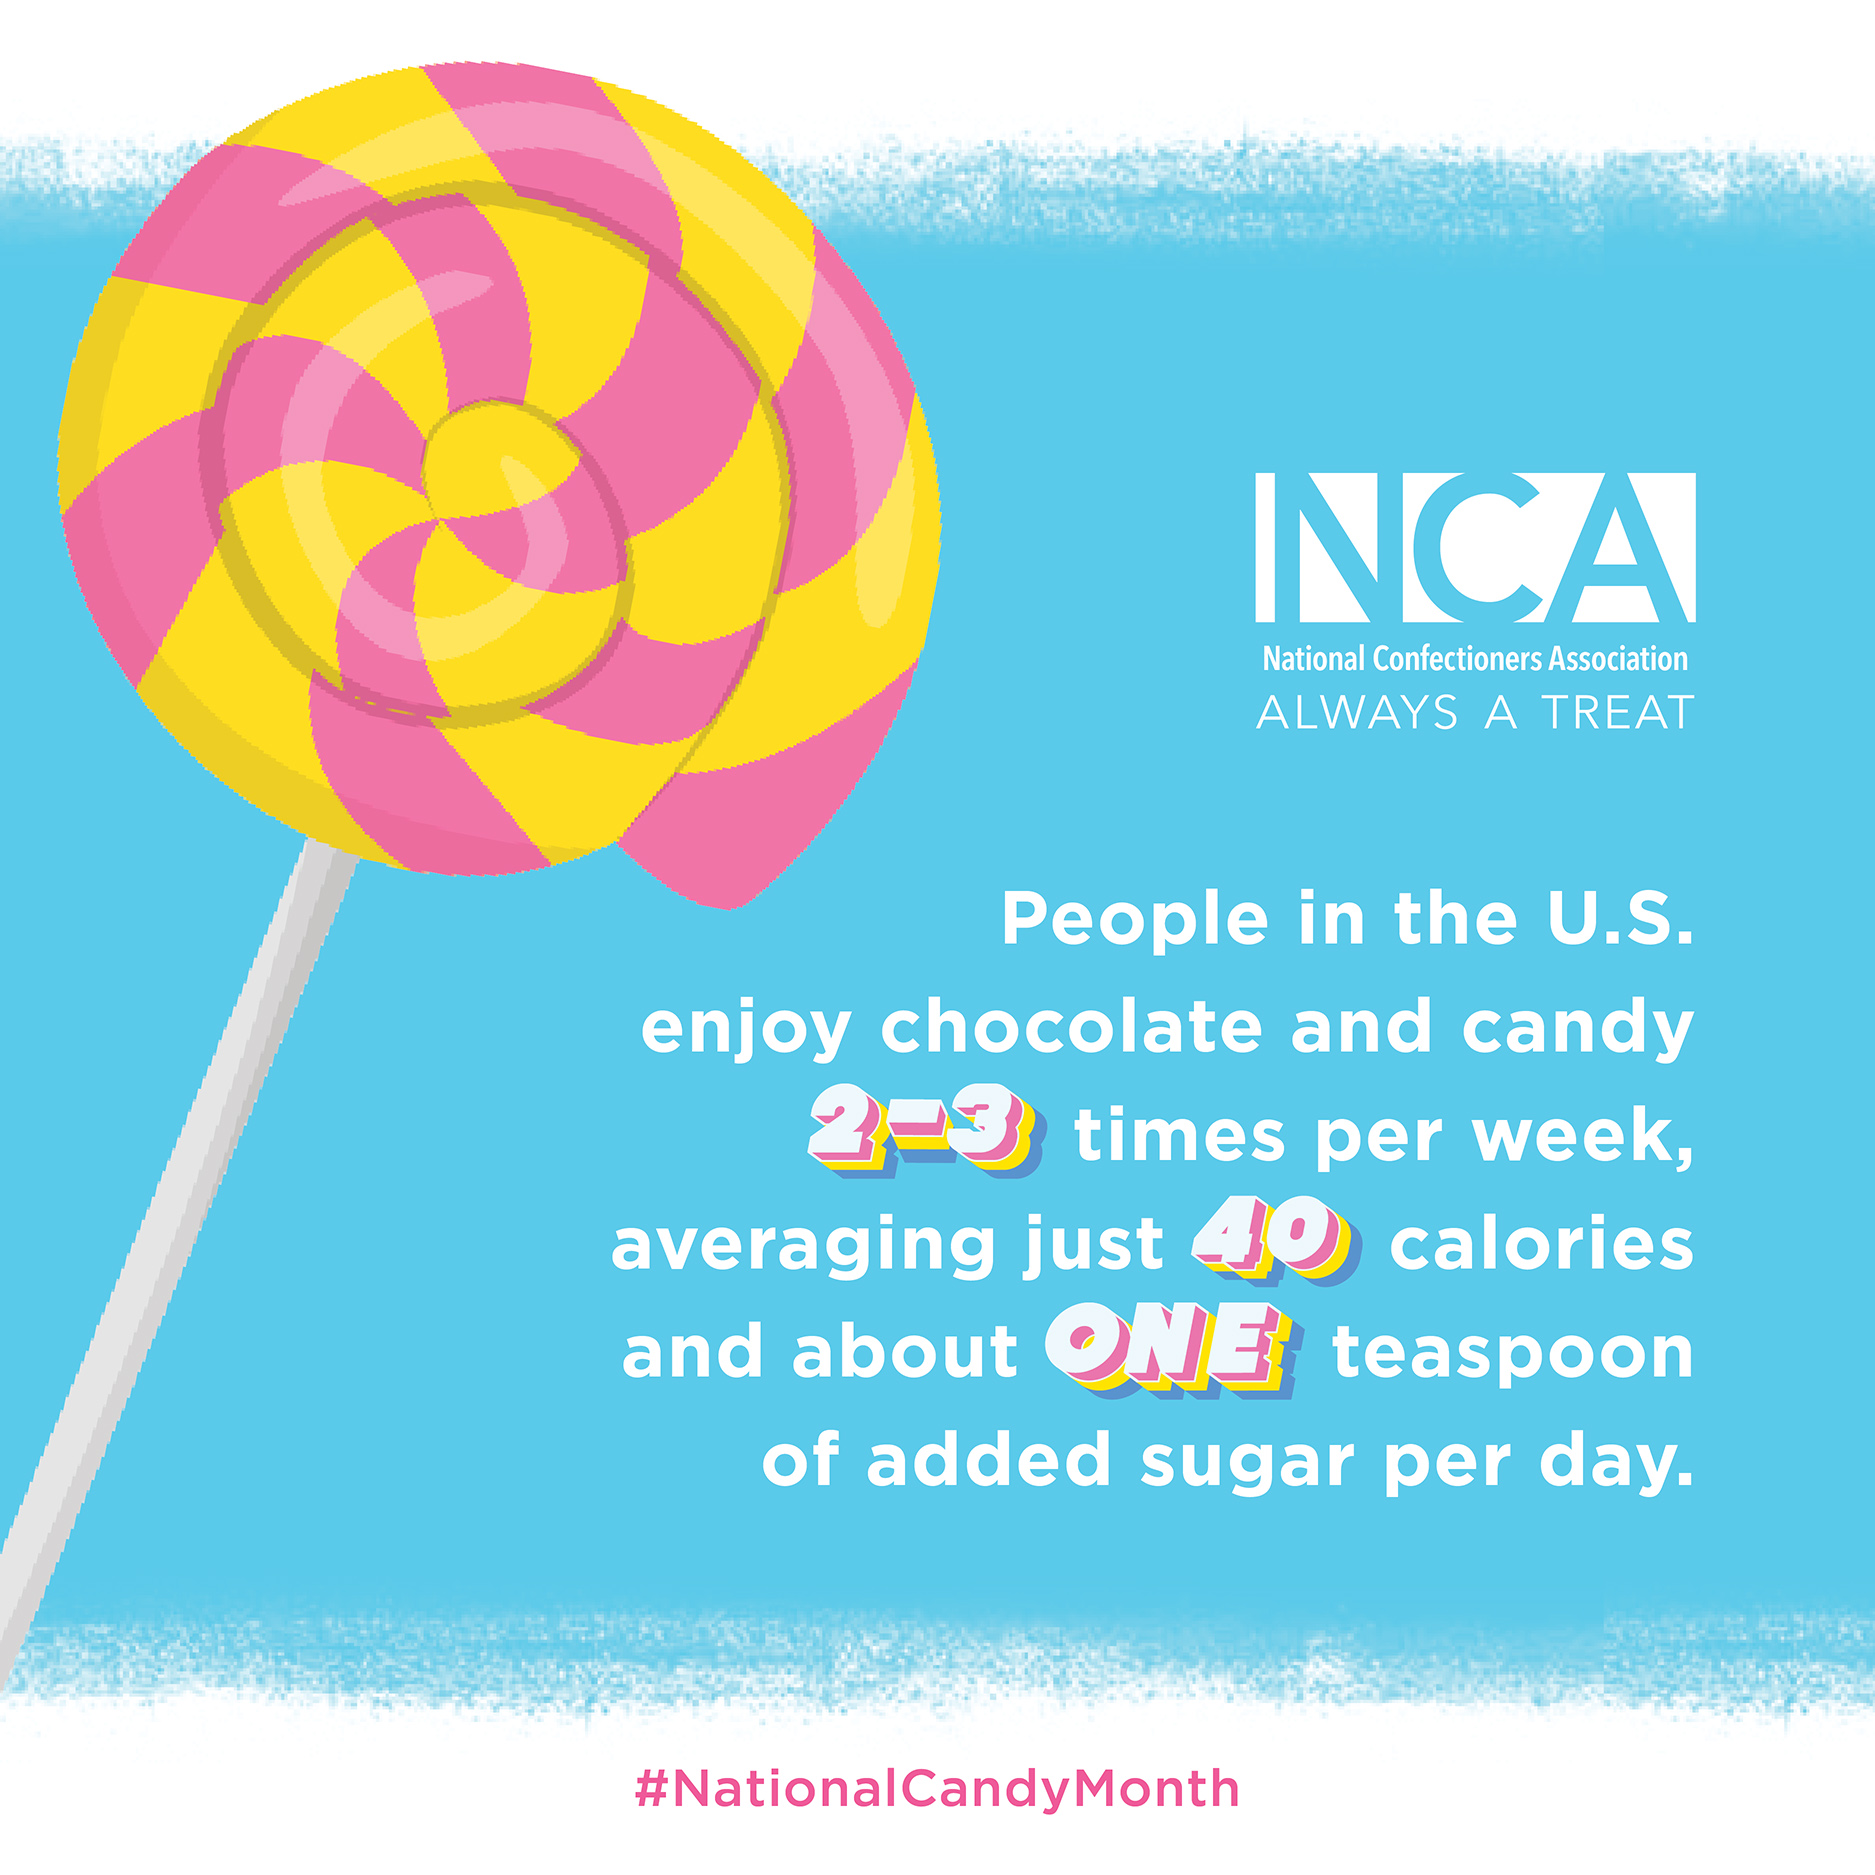 People in the U.S. enjoy chocolate and candy 2-3 times per week.